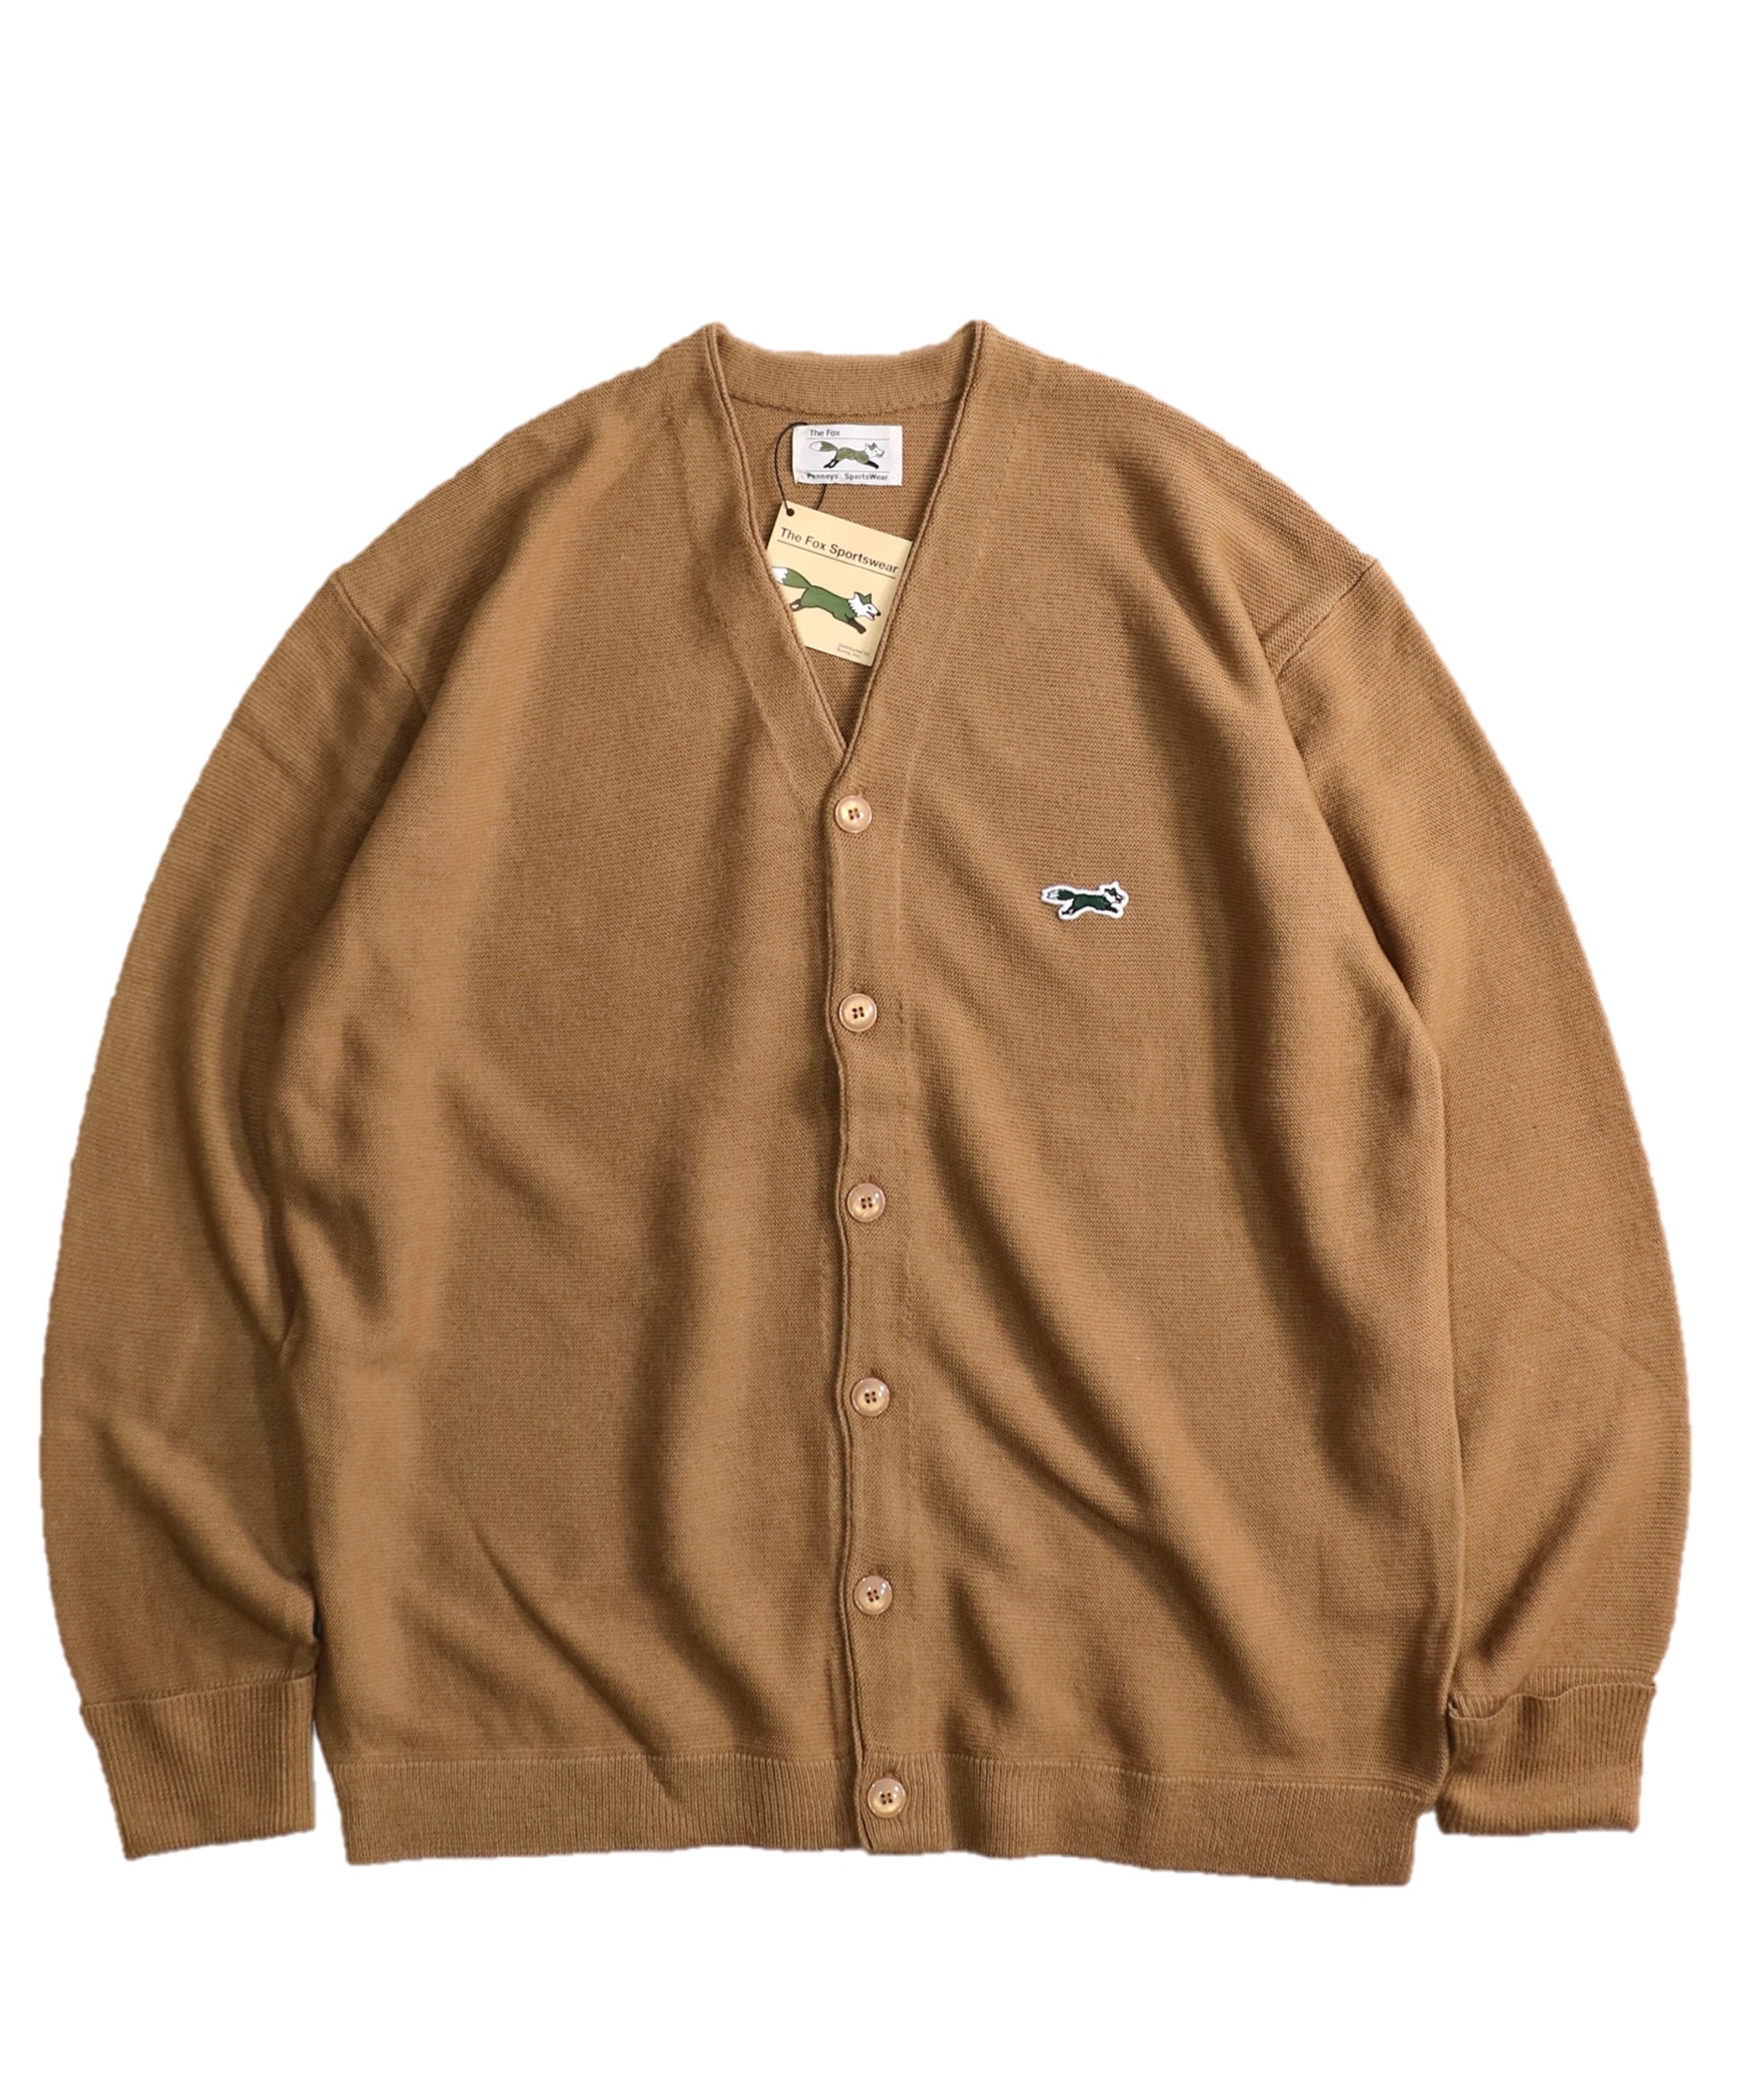 PENNEY'S / THE FOX COLOR CARDIGAN. – C.E.L.STORE NOTE